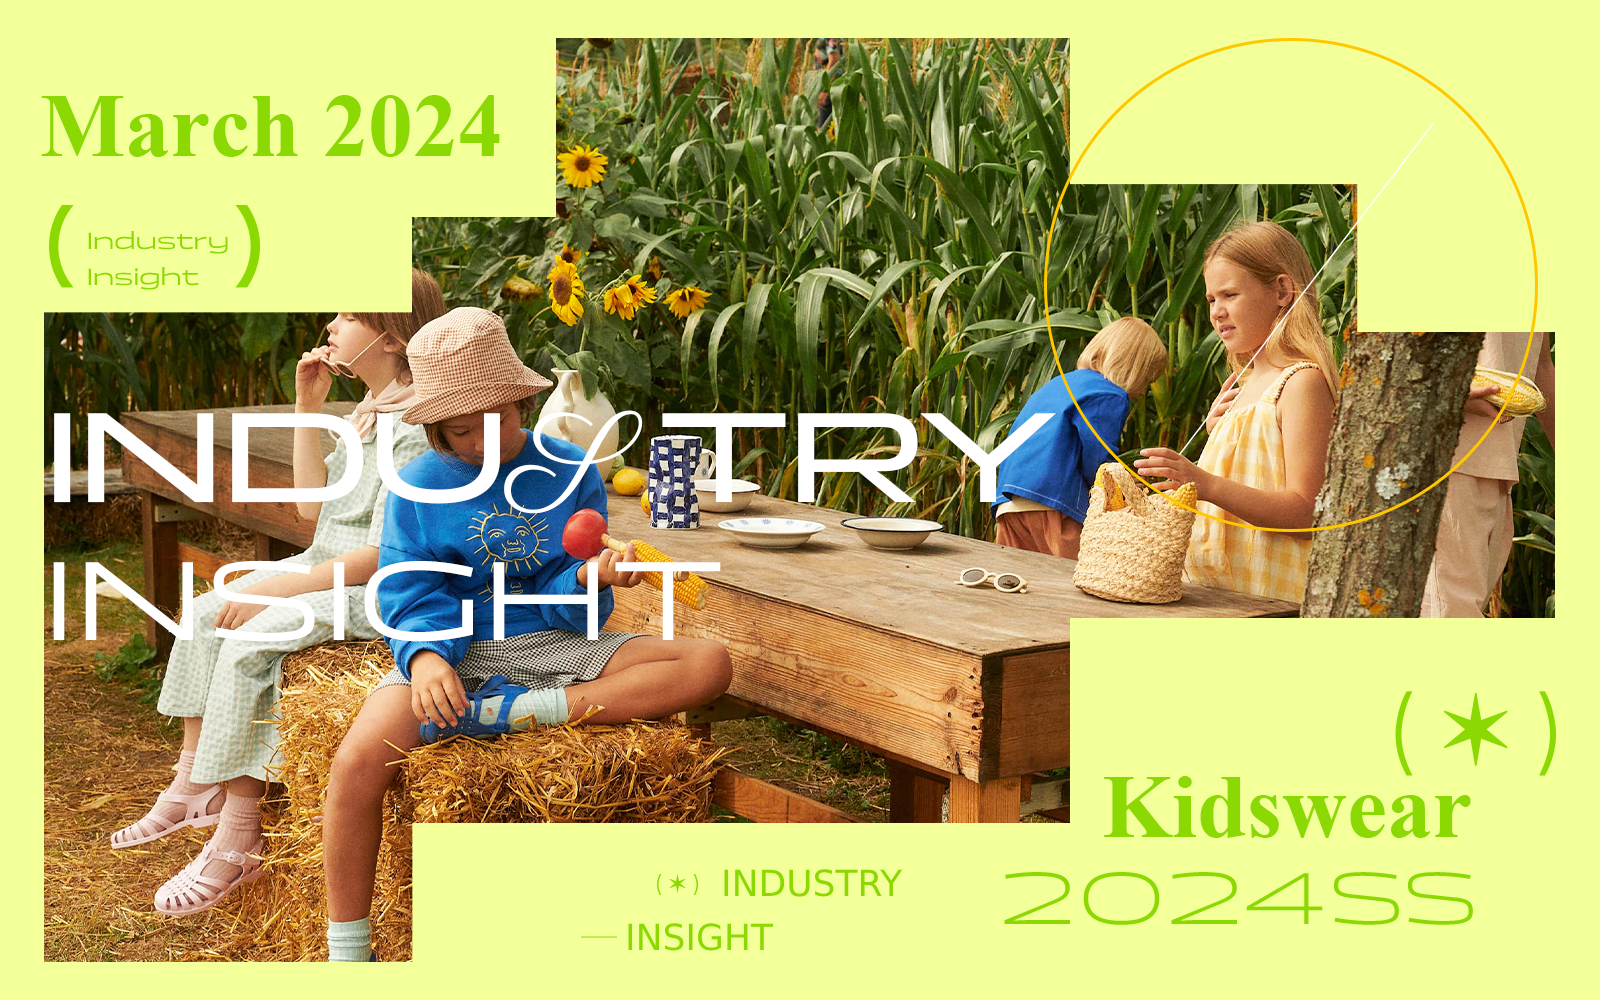 March 2024 -- The Industry Insight of Kidswear